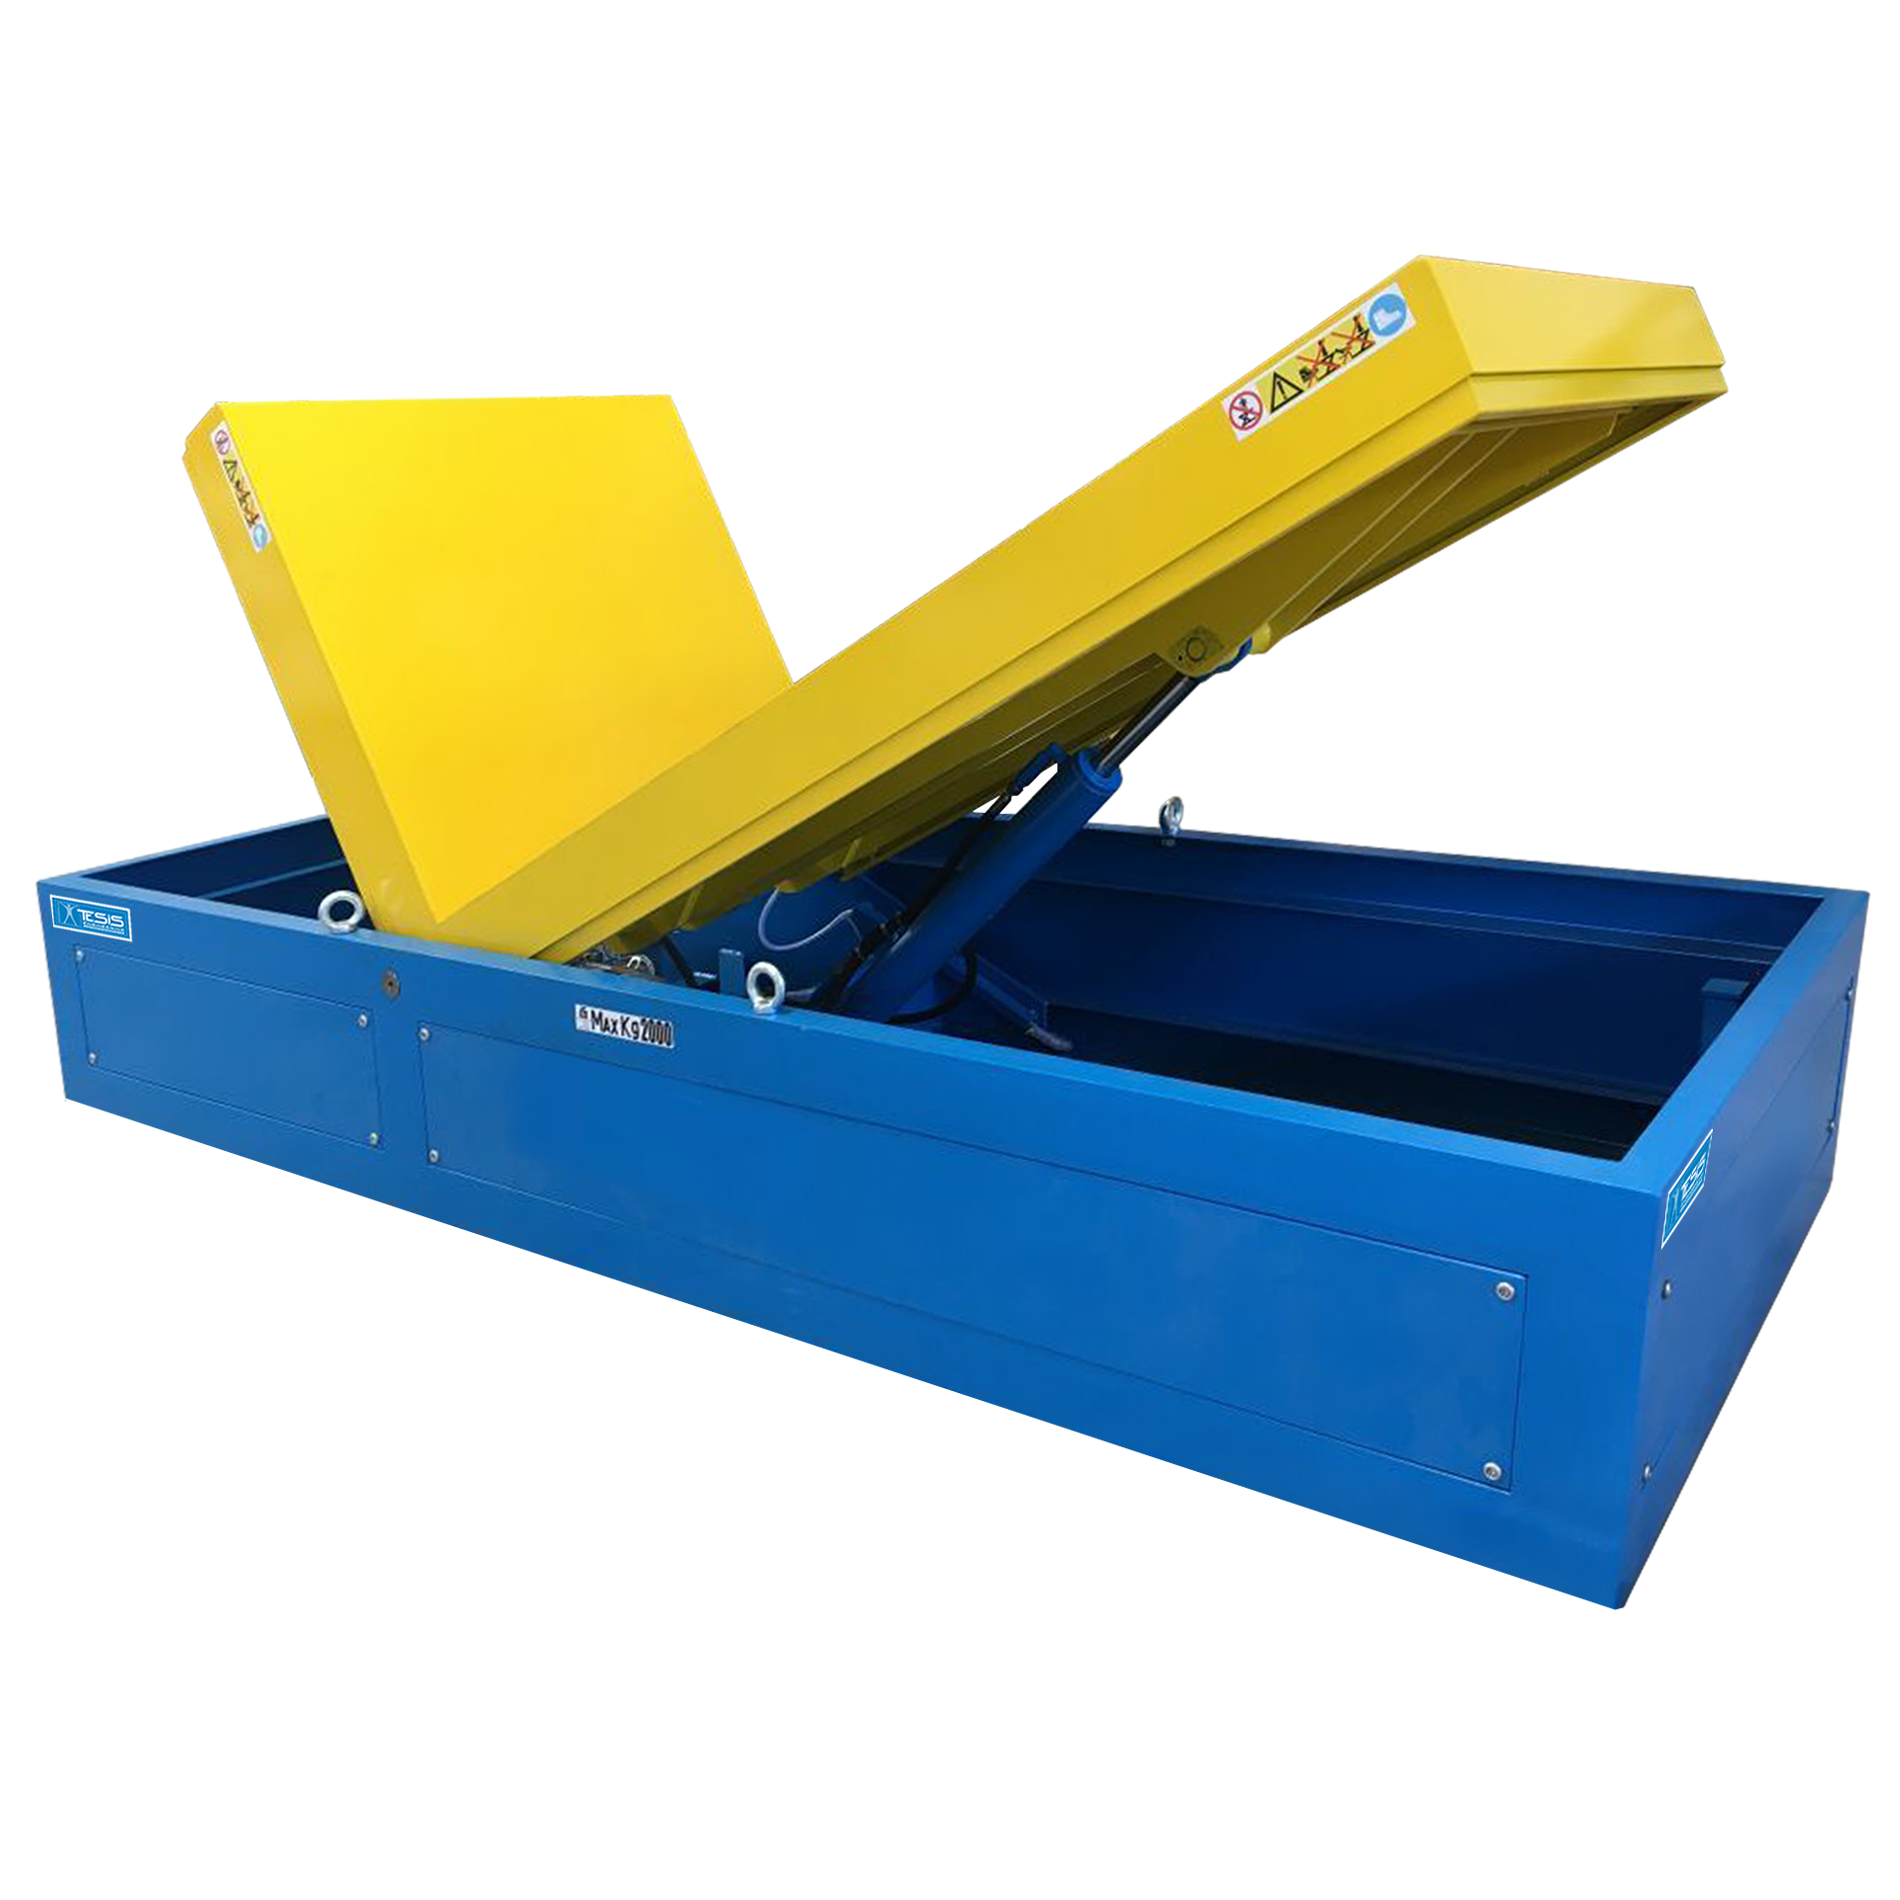 90° hydraulic tipper with flat platforms, tiltables, upenders, tippers, load positioners, pallet positioners